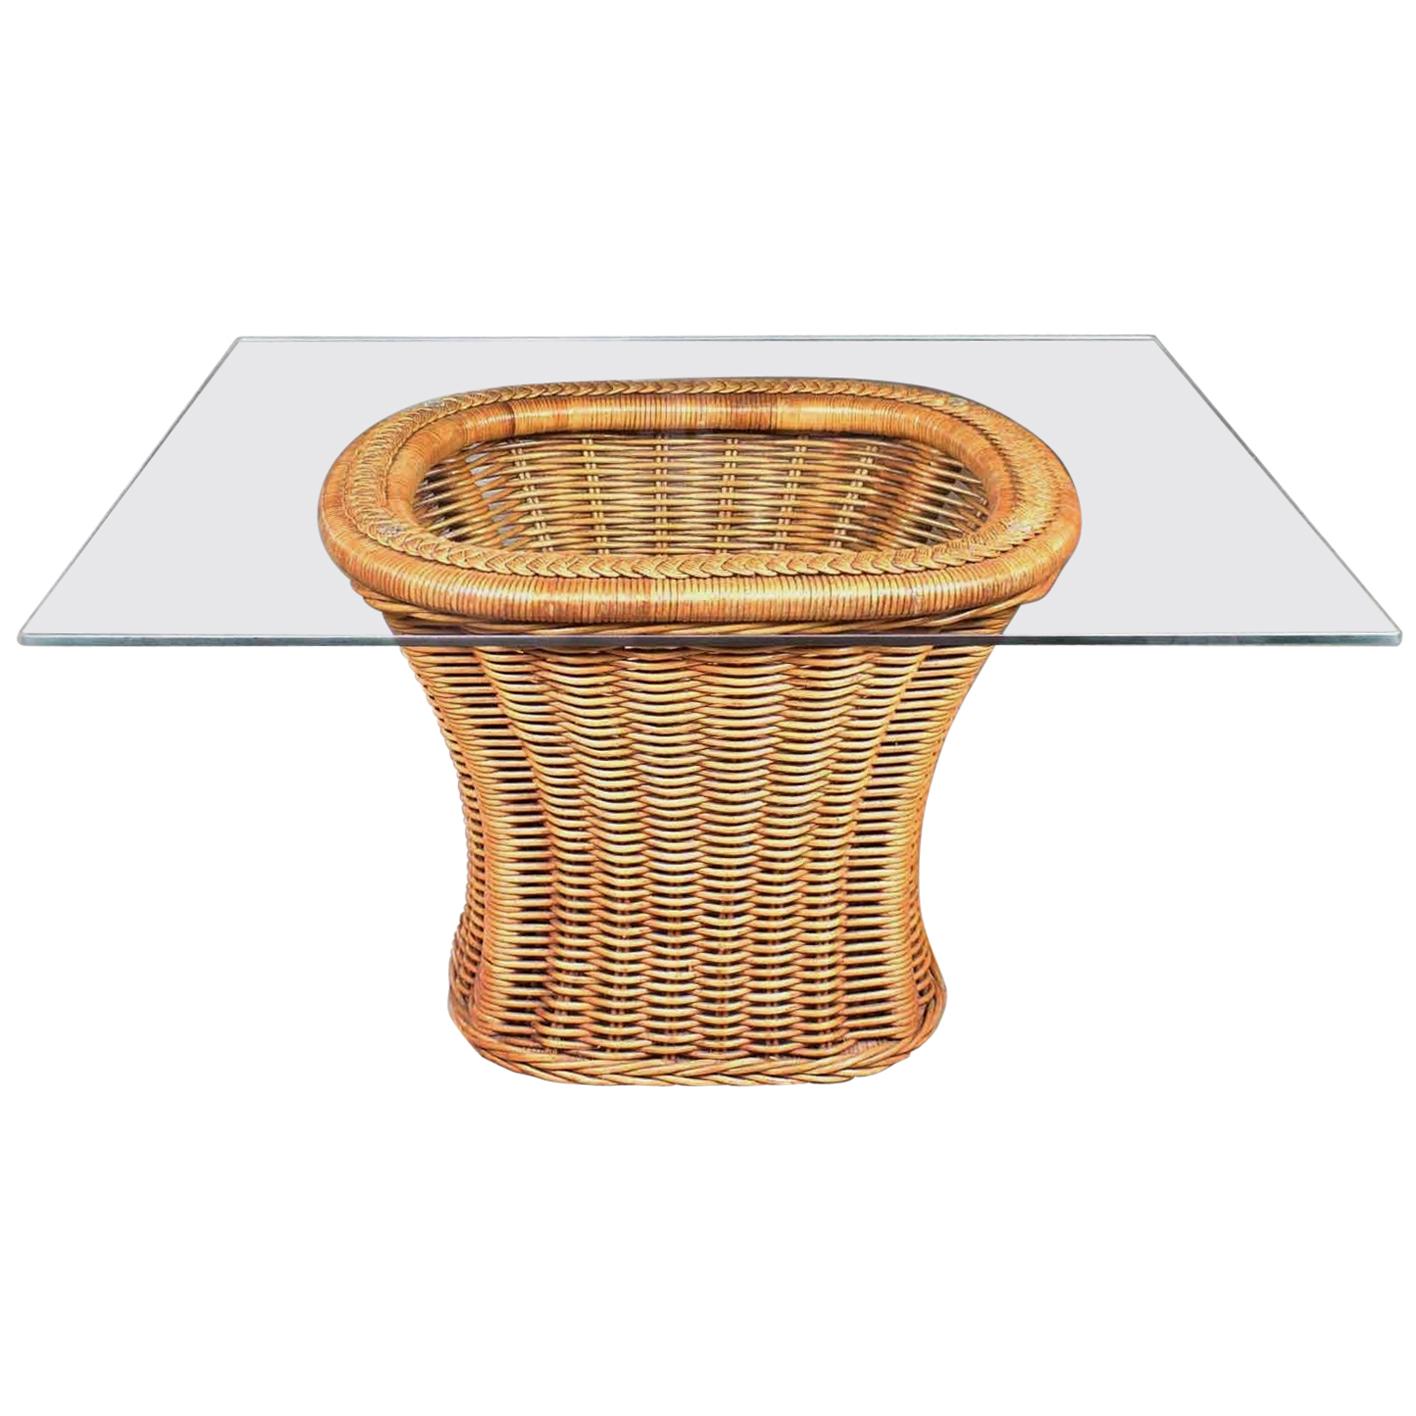 Organic Modern Woven Wicker Rattan Side or End Table with Rectangular Glass